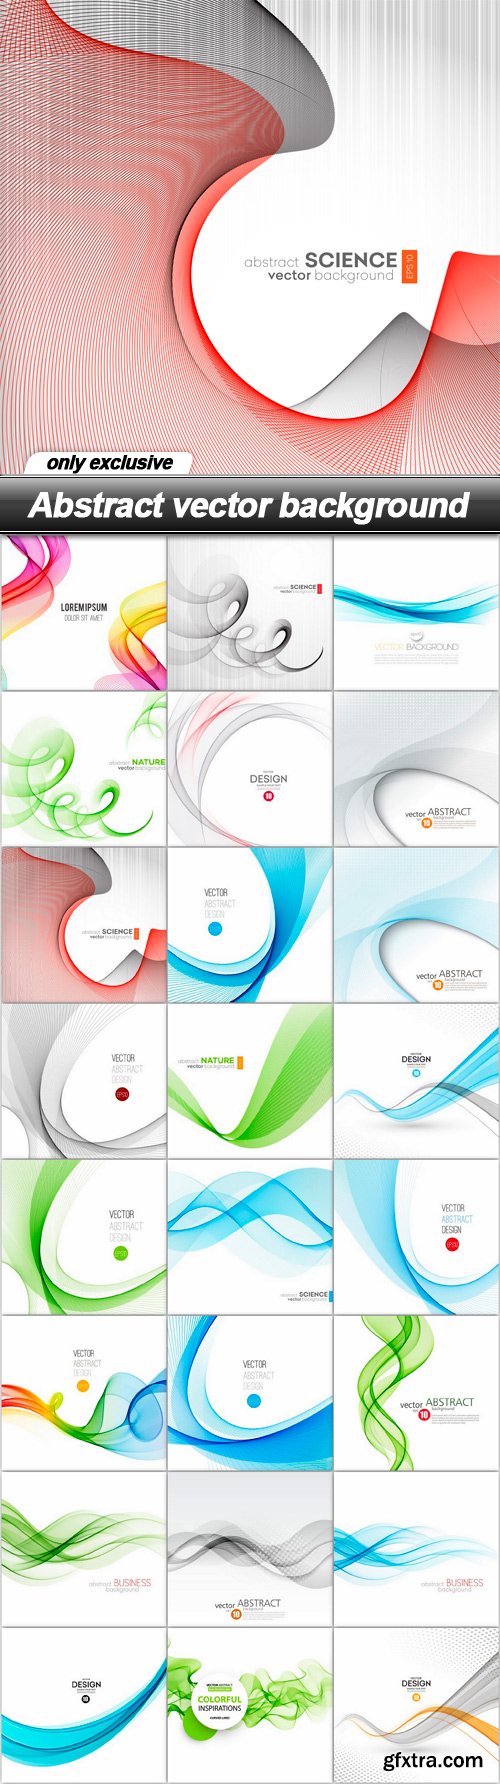 Abstract vector background - 24 EPS